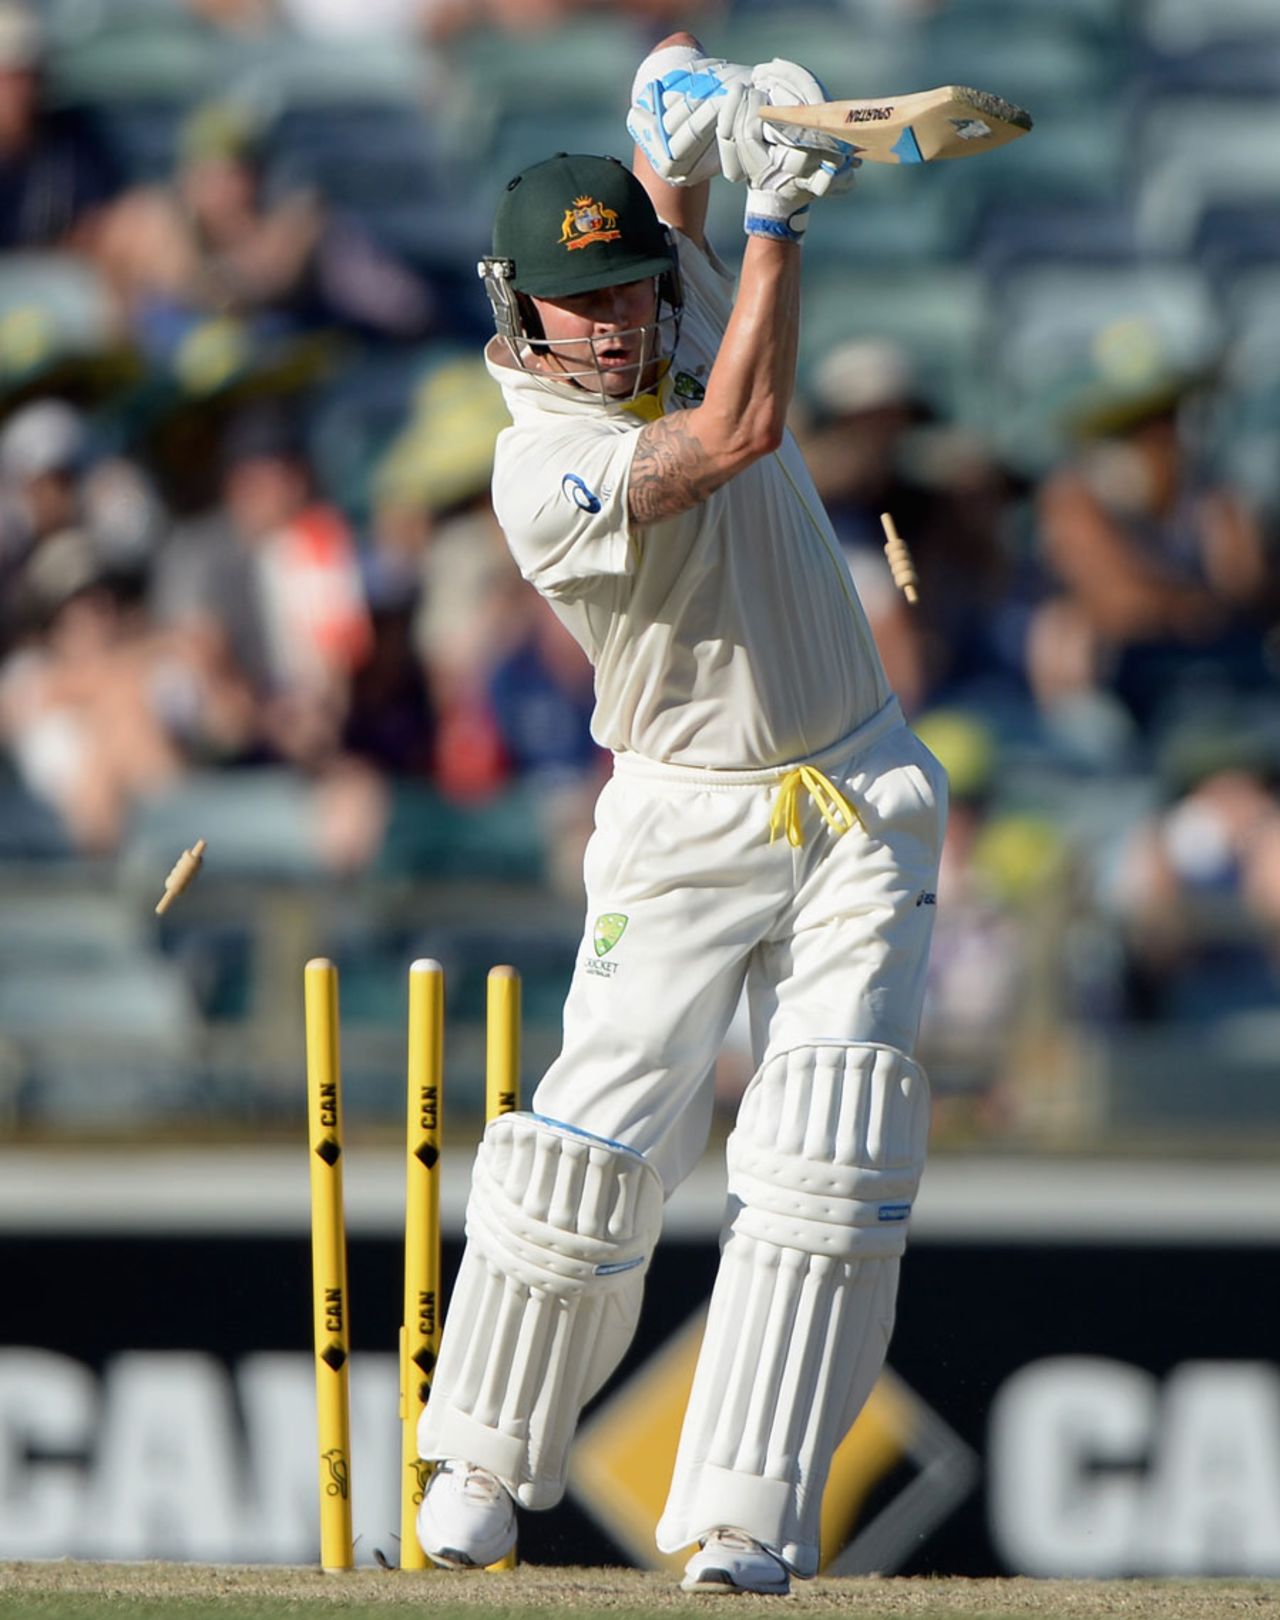 Michael Clarke was cleaned bowled by Ben Stokes, Australia v England, 3rd Test, Perth, 3rd day, December 15, 2013